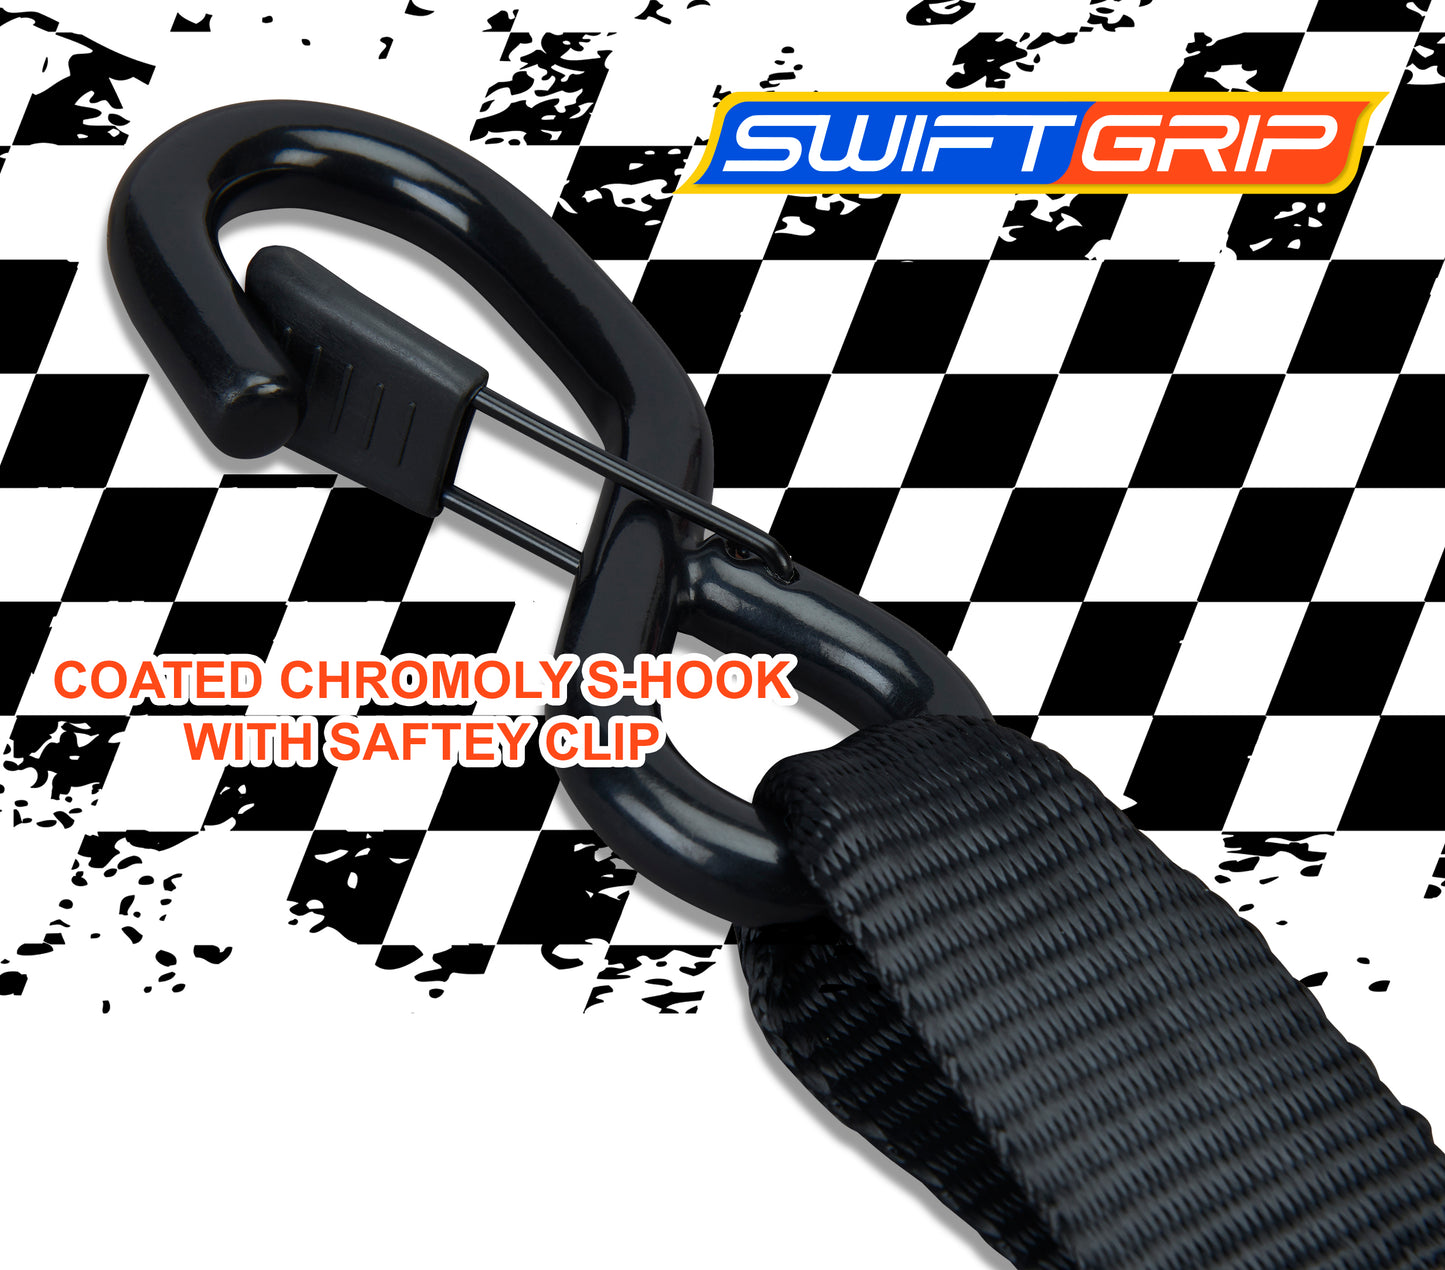 Ratchet Straps Heavy Duty Tie Downs, (4) Extra Long 12 Foot Strap with Integrated Soft Tie Hook, UTV Tie Down Straps, Motorcycle Tie Down Straps, Padded Handles &amp; Coated Chromoly Hooks, Black